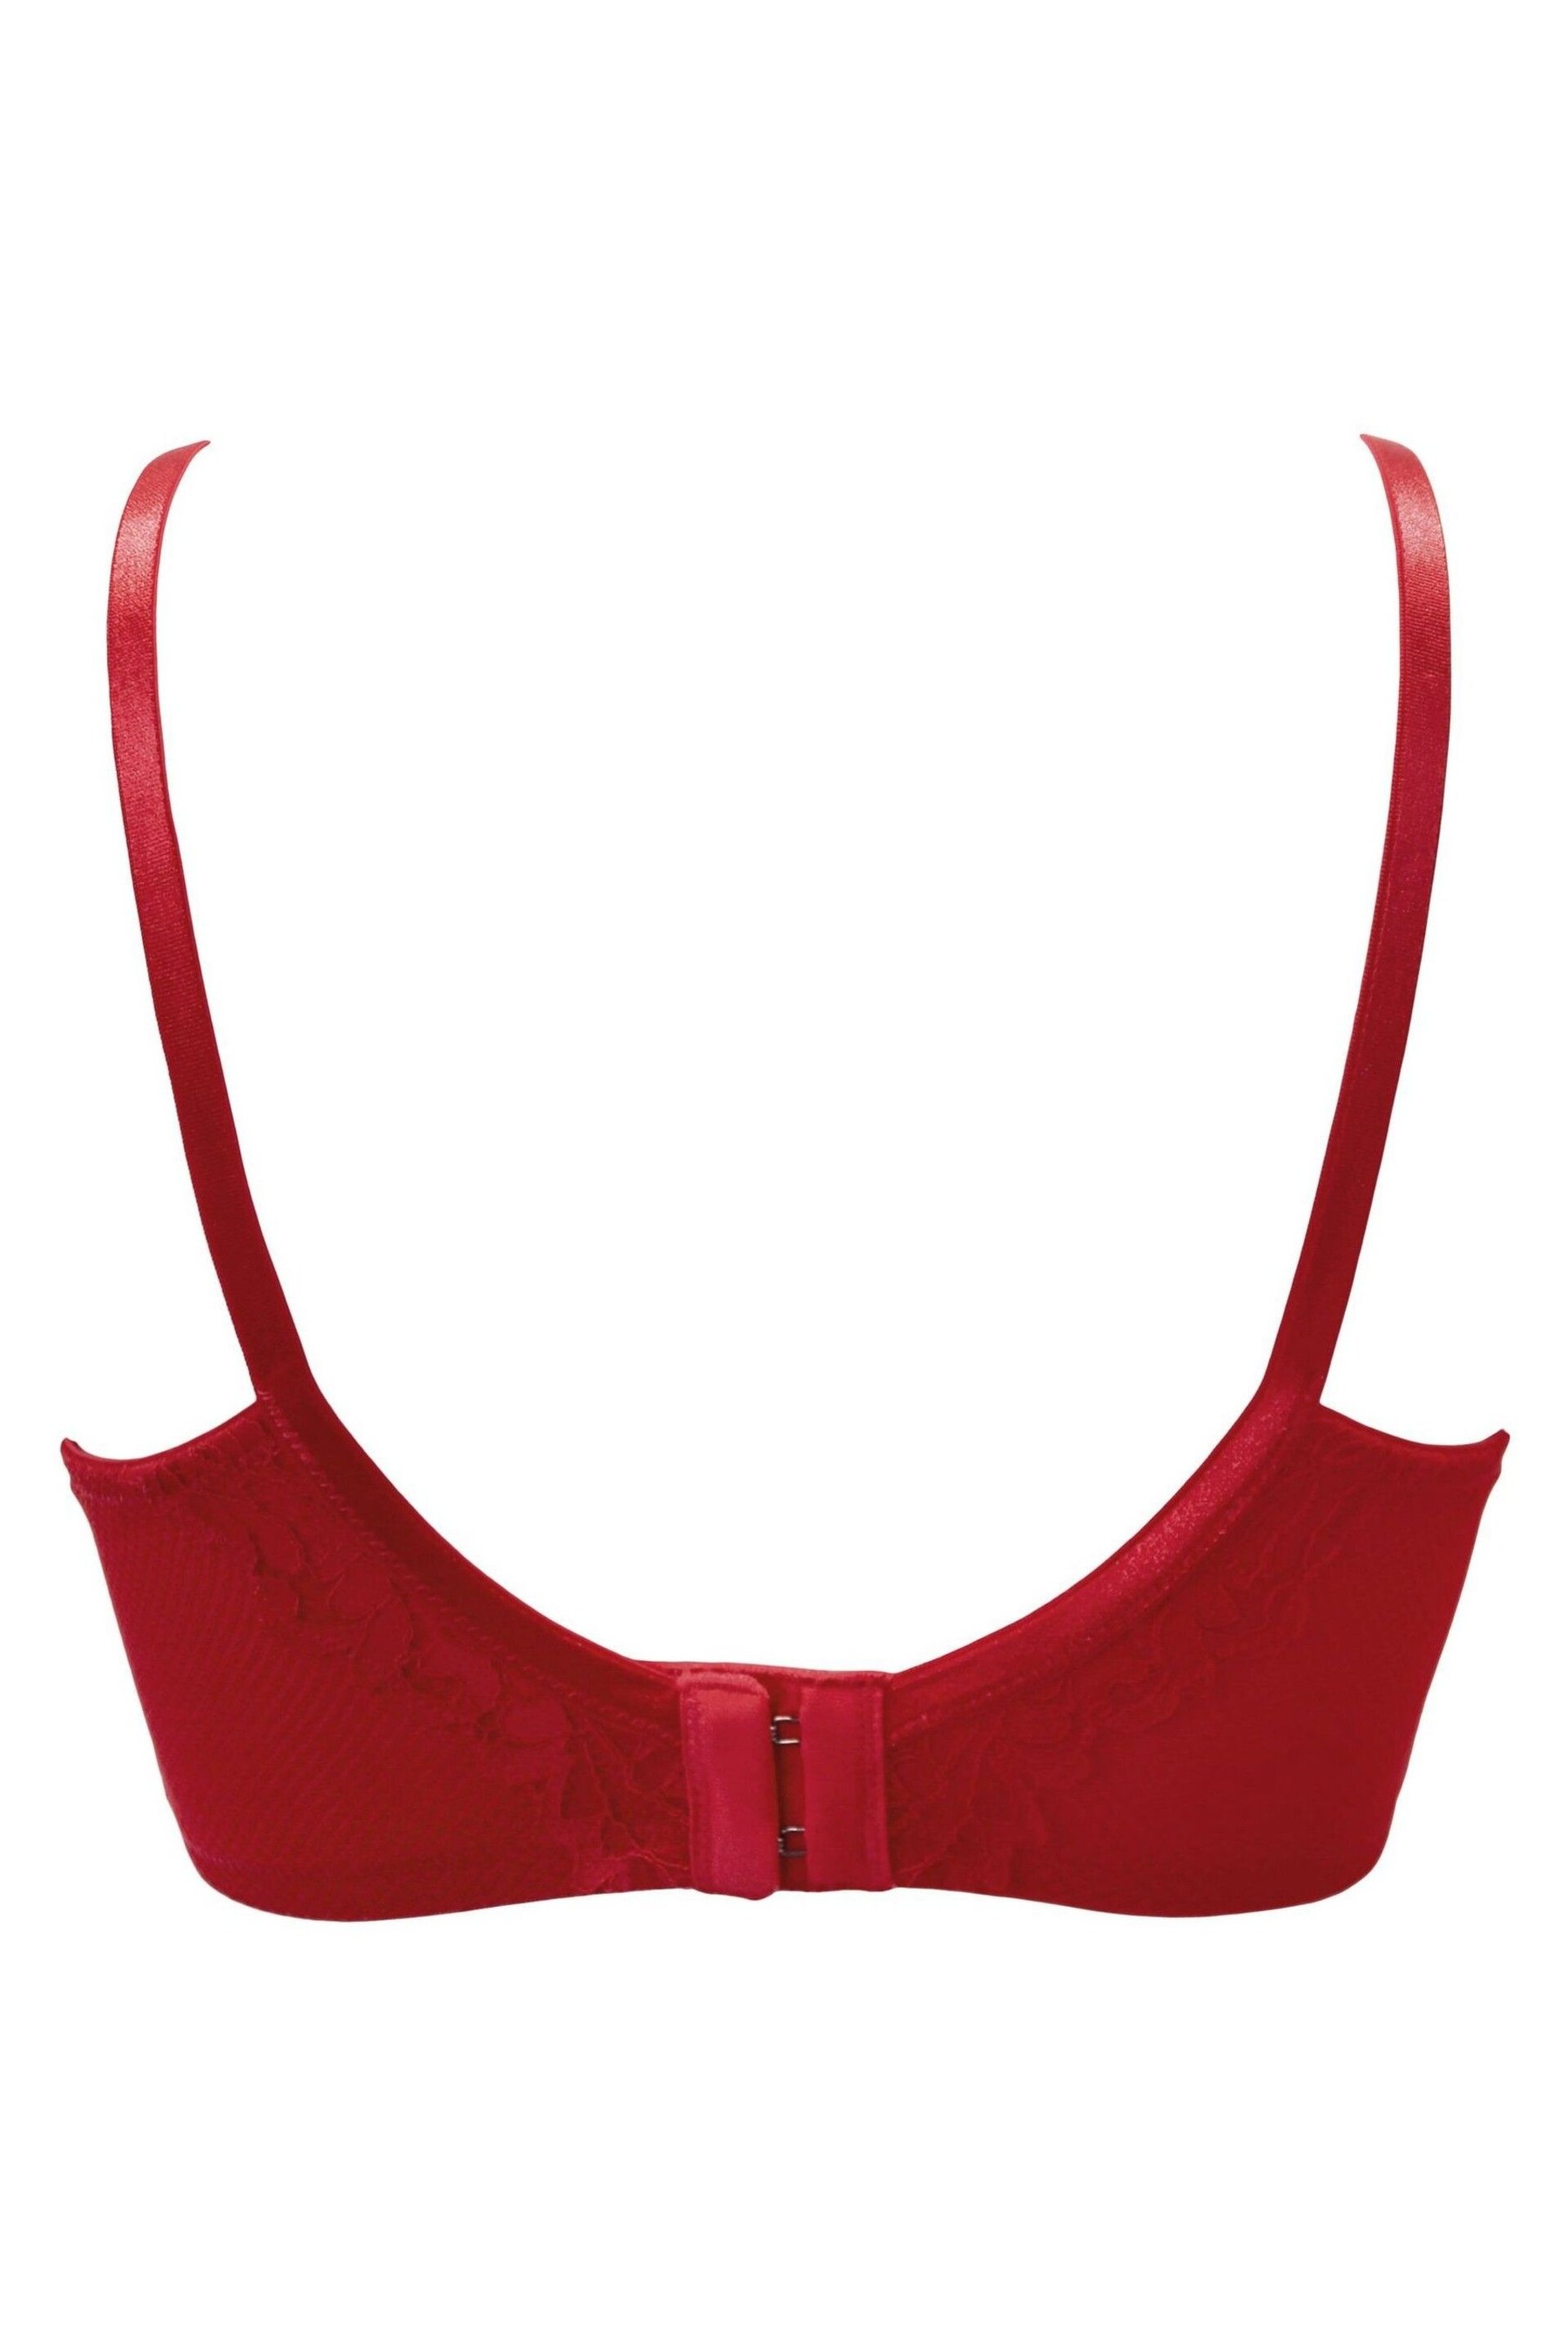 Pour Moi Red Lavish Underwired Bra - Image 4 of 4